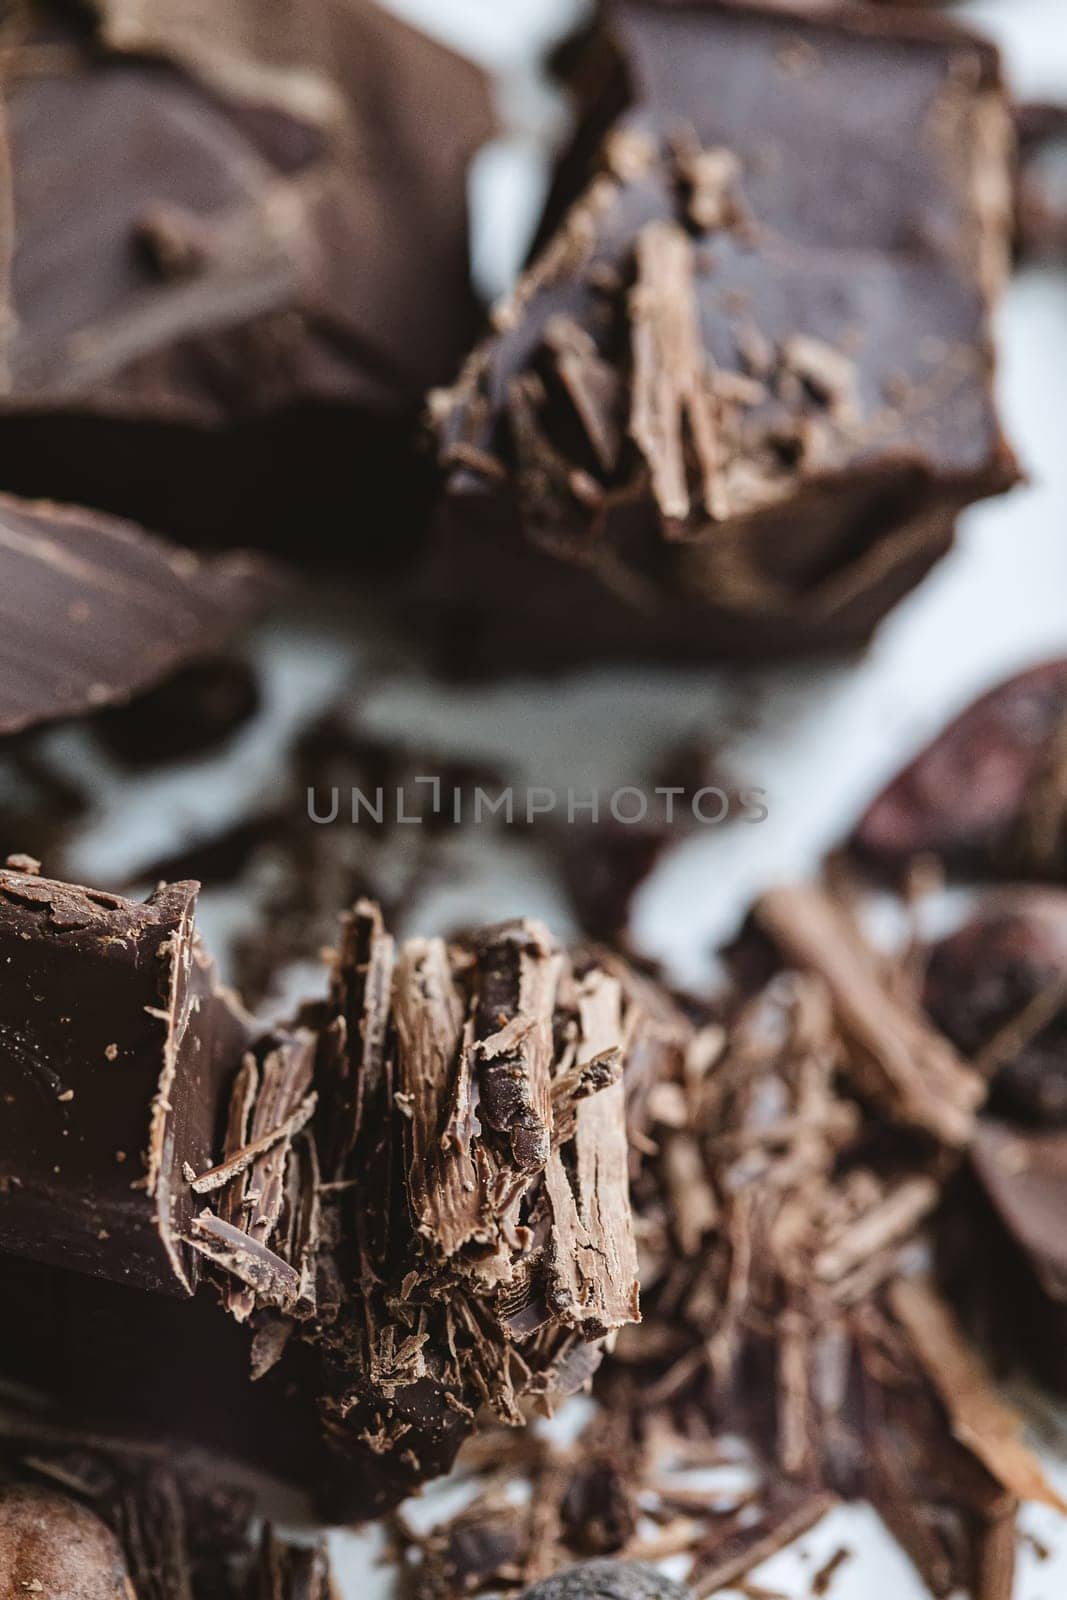 Cocoa beans with chocolate on a white background. Shalllow dof. by sarymsakov